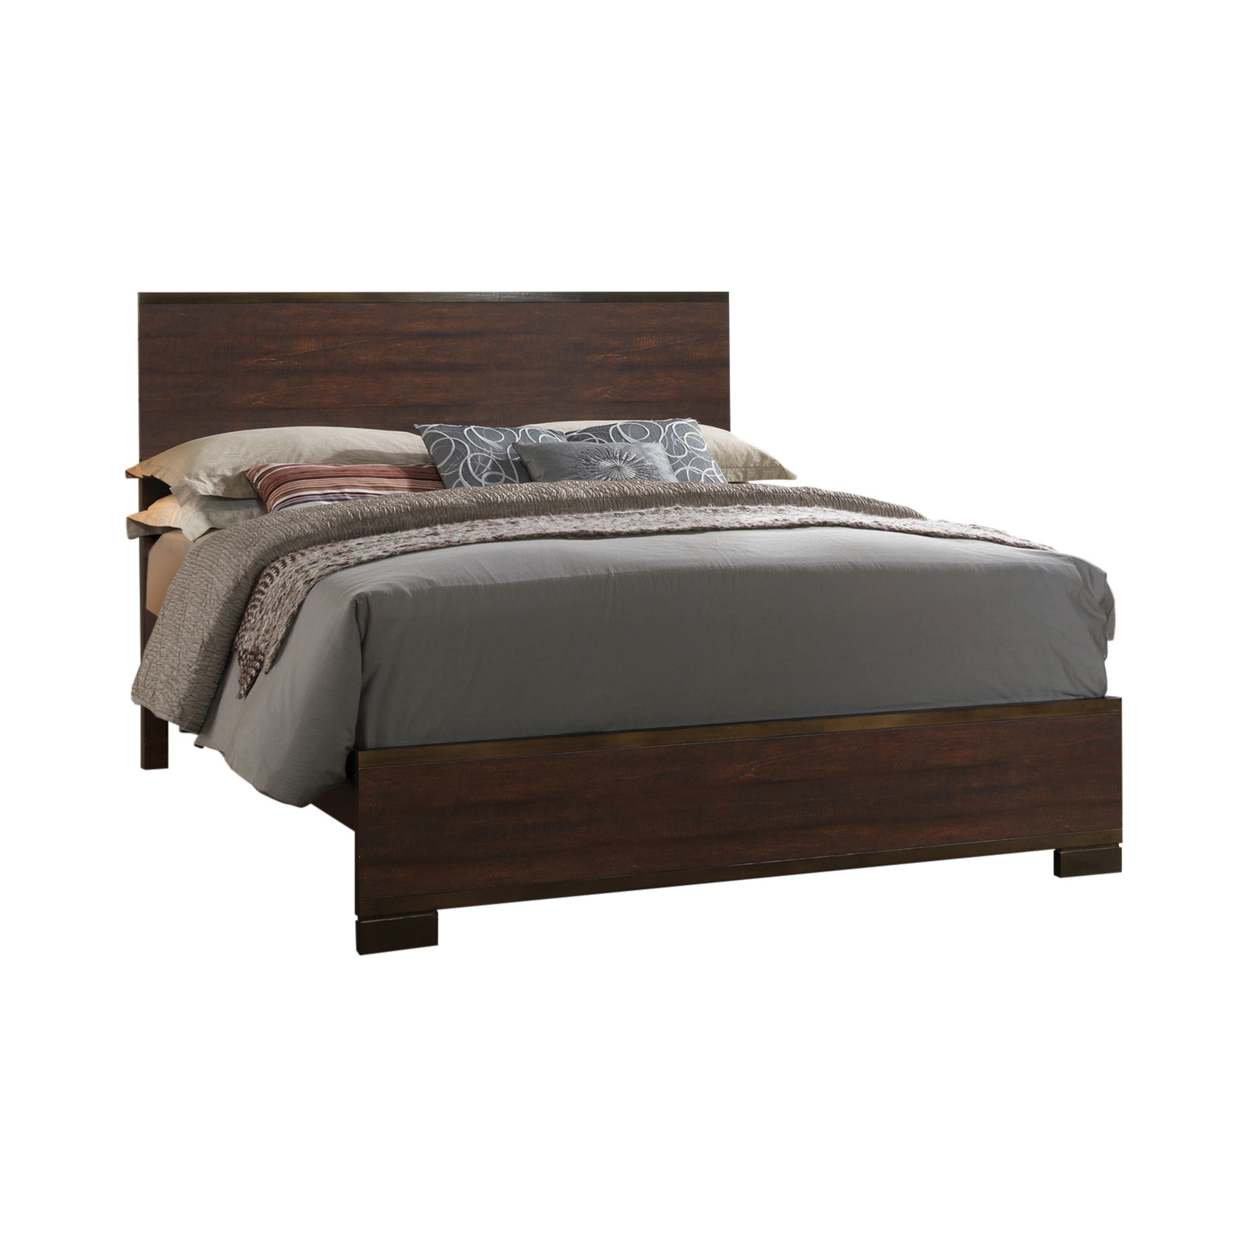 Transitional Style Eastern King Size Panel Bed With Low Footboard, Brown- Saltoro Sherpi